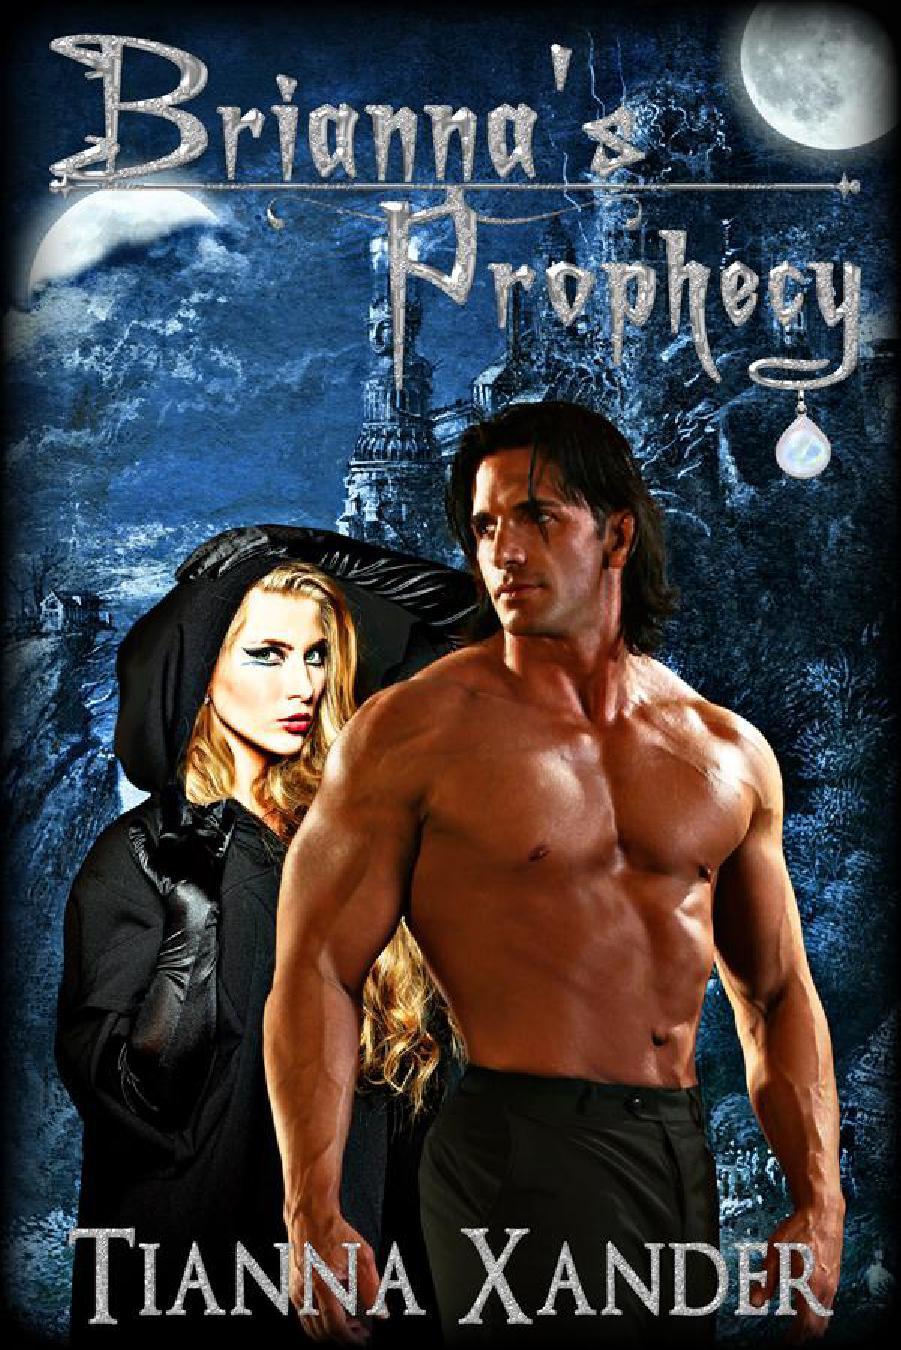 Briannas Prophecy by Tianna Xander